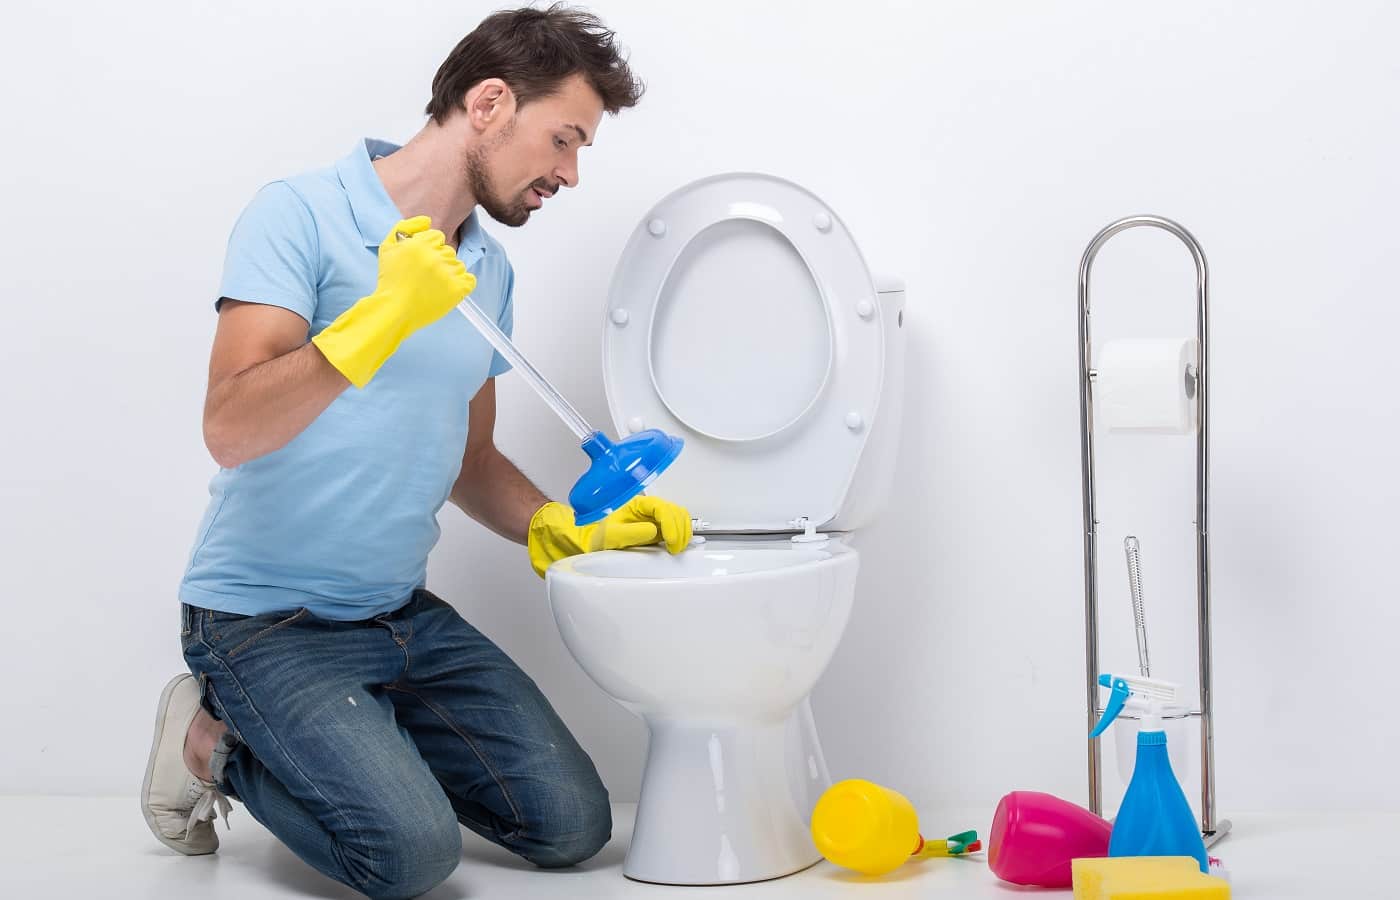 Young man unclogging a toilet with plunger.